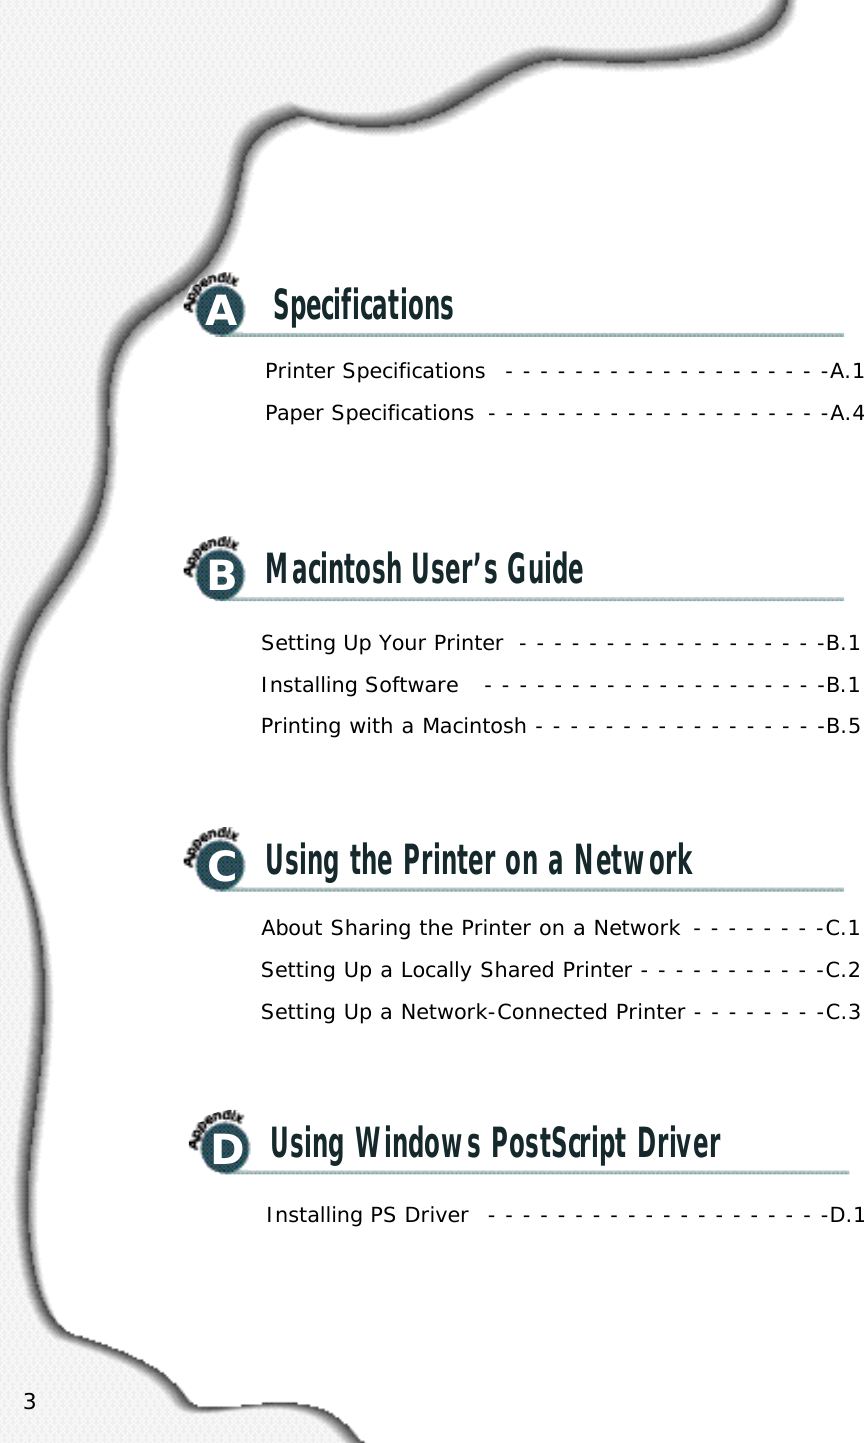 3ASpecificationsBMacintosh User’s GuideCUsing the Printer on a NetworkPrinter Specifications  - - - - - - - - - - - - - - - - - - -A.1Paper Specifications  - - - - - - - - - - - - - - - - - - - -A.4Setting Up Your Printer  - - - - - - - - - - - - - - - - - -B.1Installing Software  - - - - - - - - - - - - - - - - - - - -B.1Printing with a Macintosh - - - - - - - - - - - - - - - - -B.5About Sharing the Printer on a Network  - - - - - - - -C.1Setting Up a Locally Shared Printer - - - - - - - - - - -C.2Setting Up a Network-Connected Printer - - - - - - - -C.3DUsing Windows PostScript DriverInstalling PS Driver  - - - - - - - - - - - - - - - - - - - -D.1